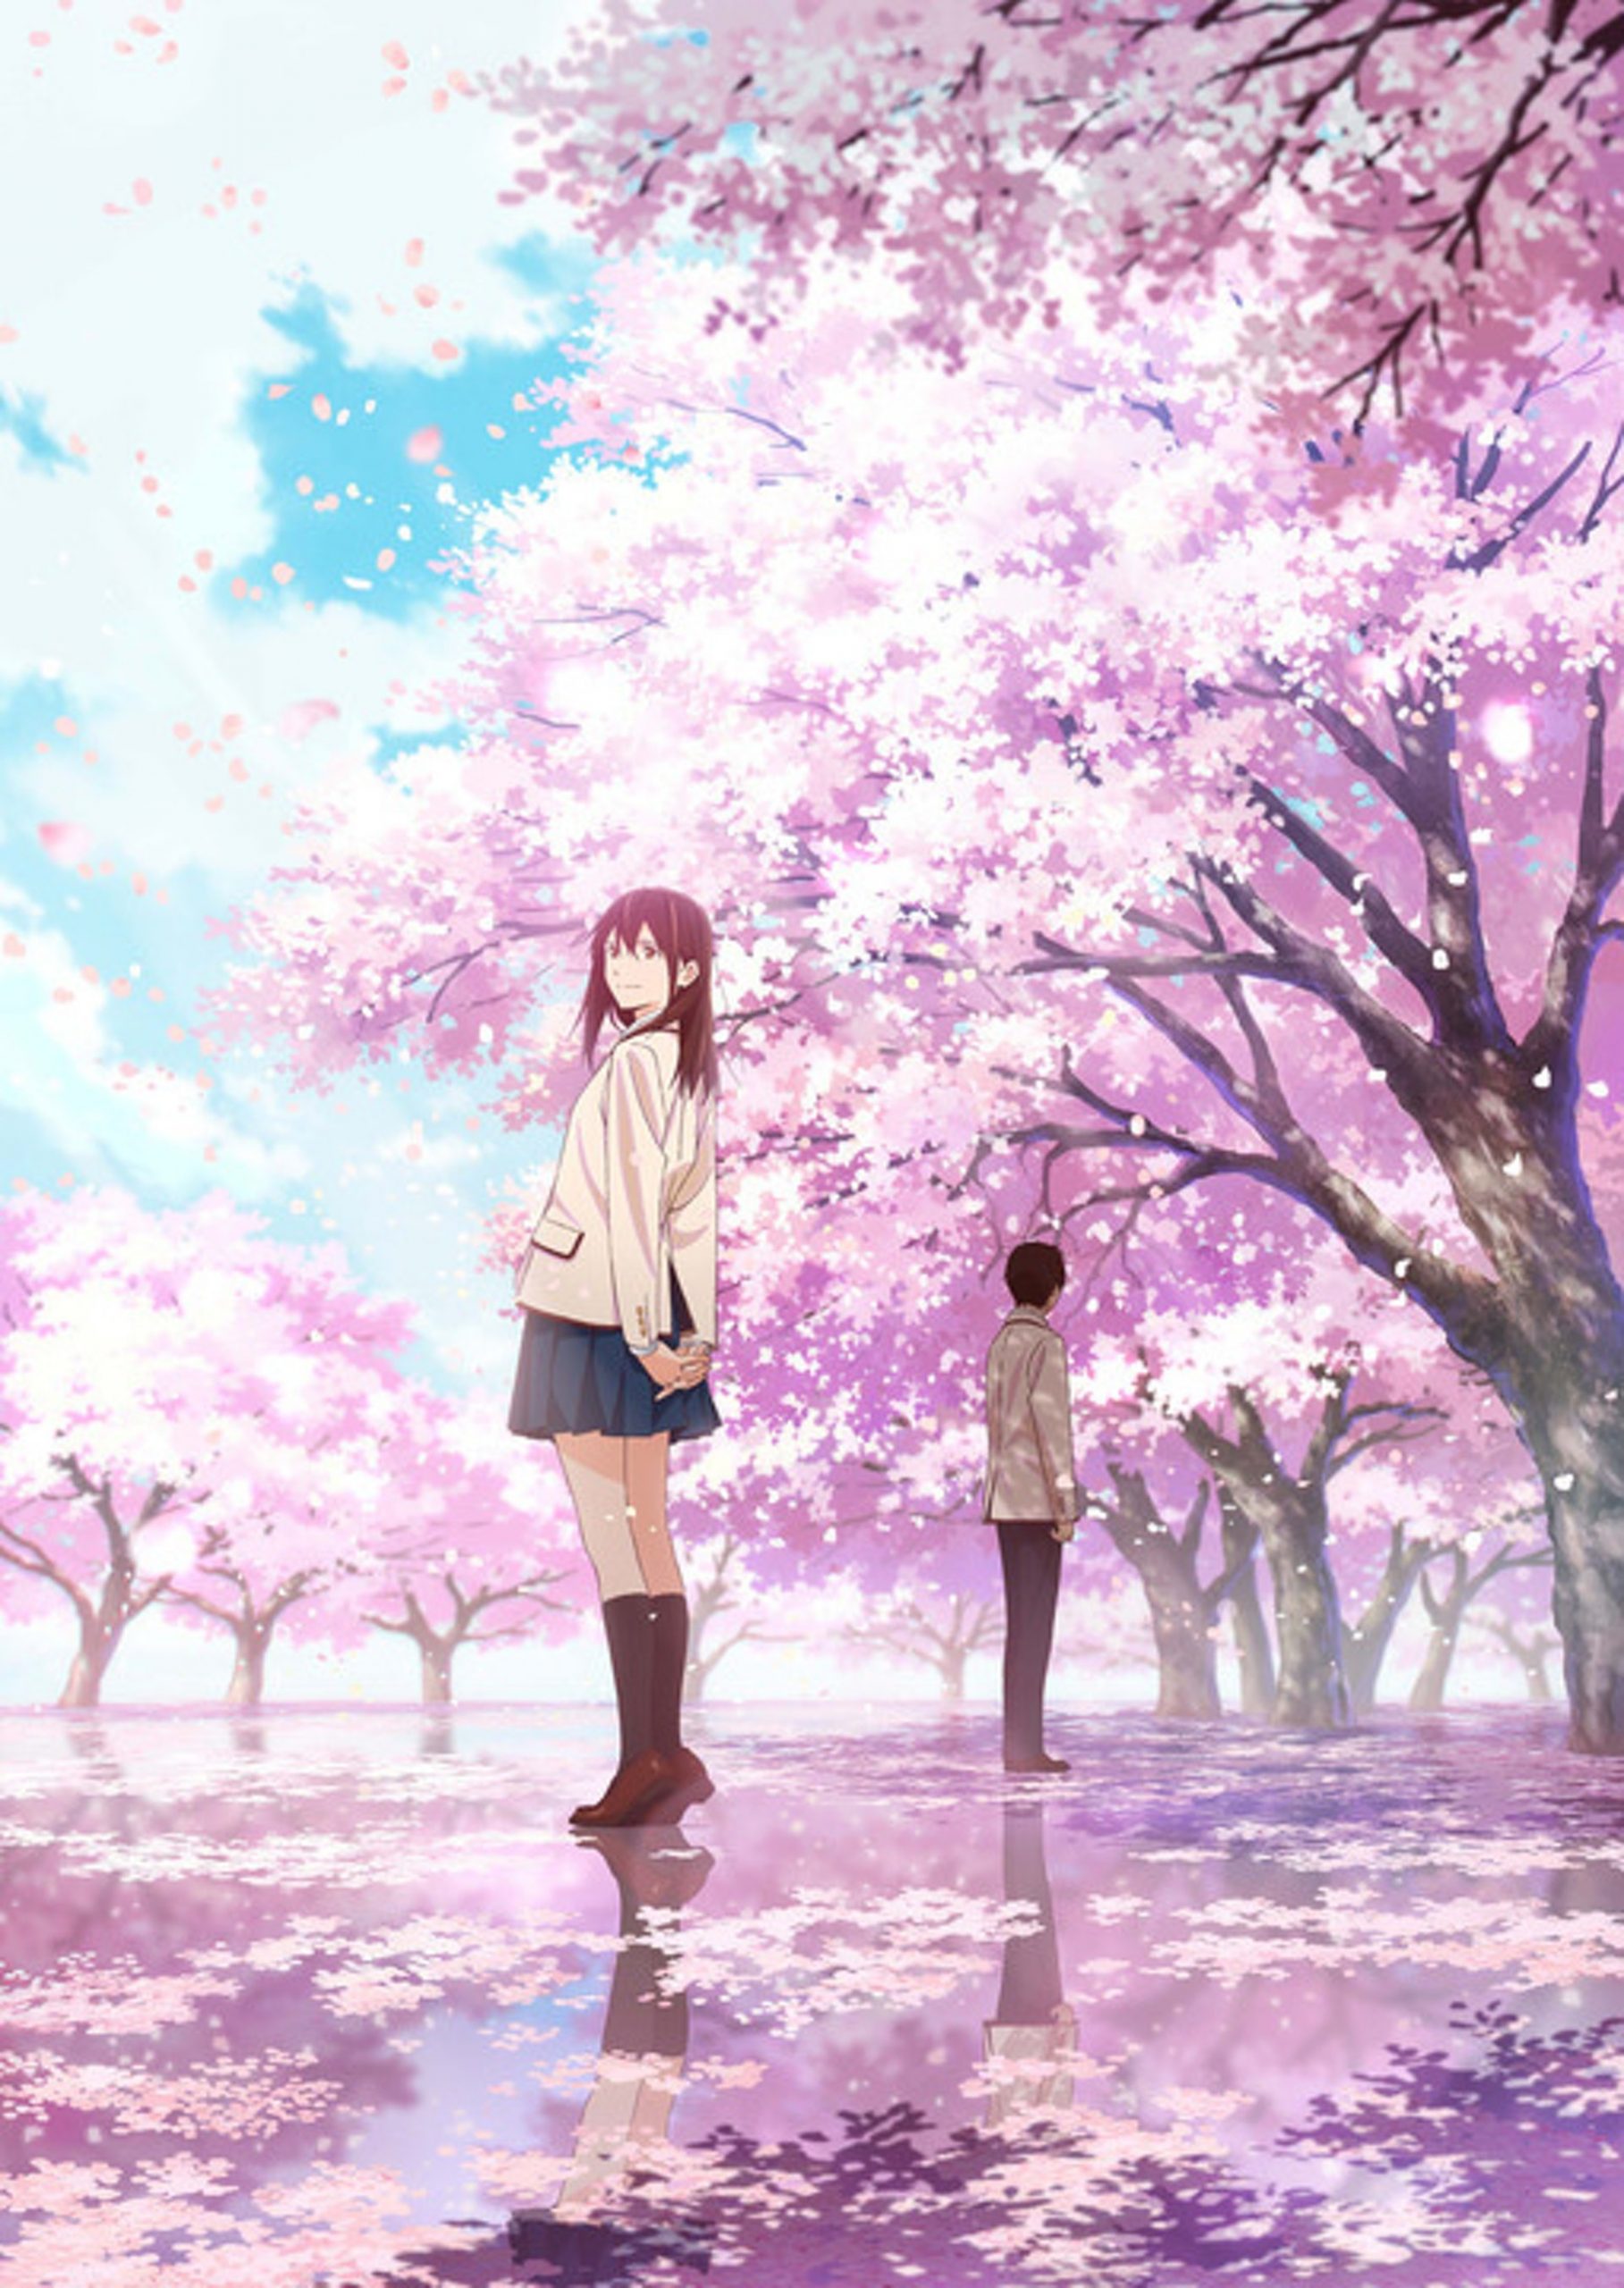 Sad Anime Movies Top 16 Emotional Anime Movies To Watch on OTT That Will  Leave You Weeping  Pricebabacom Daily